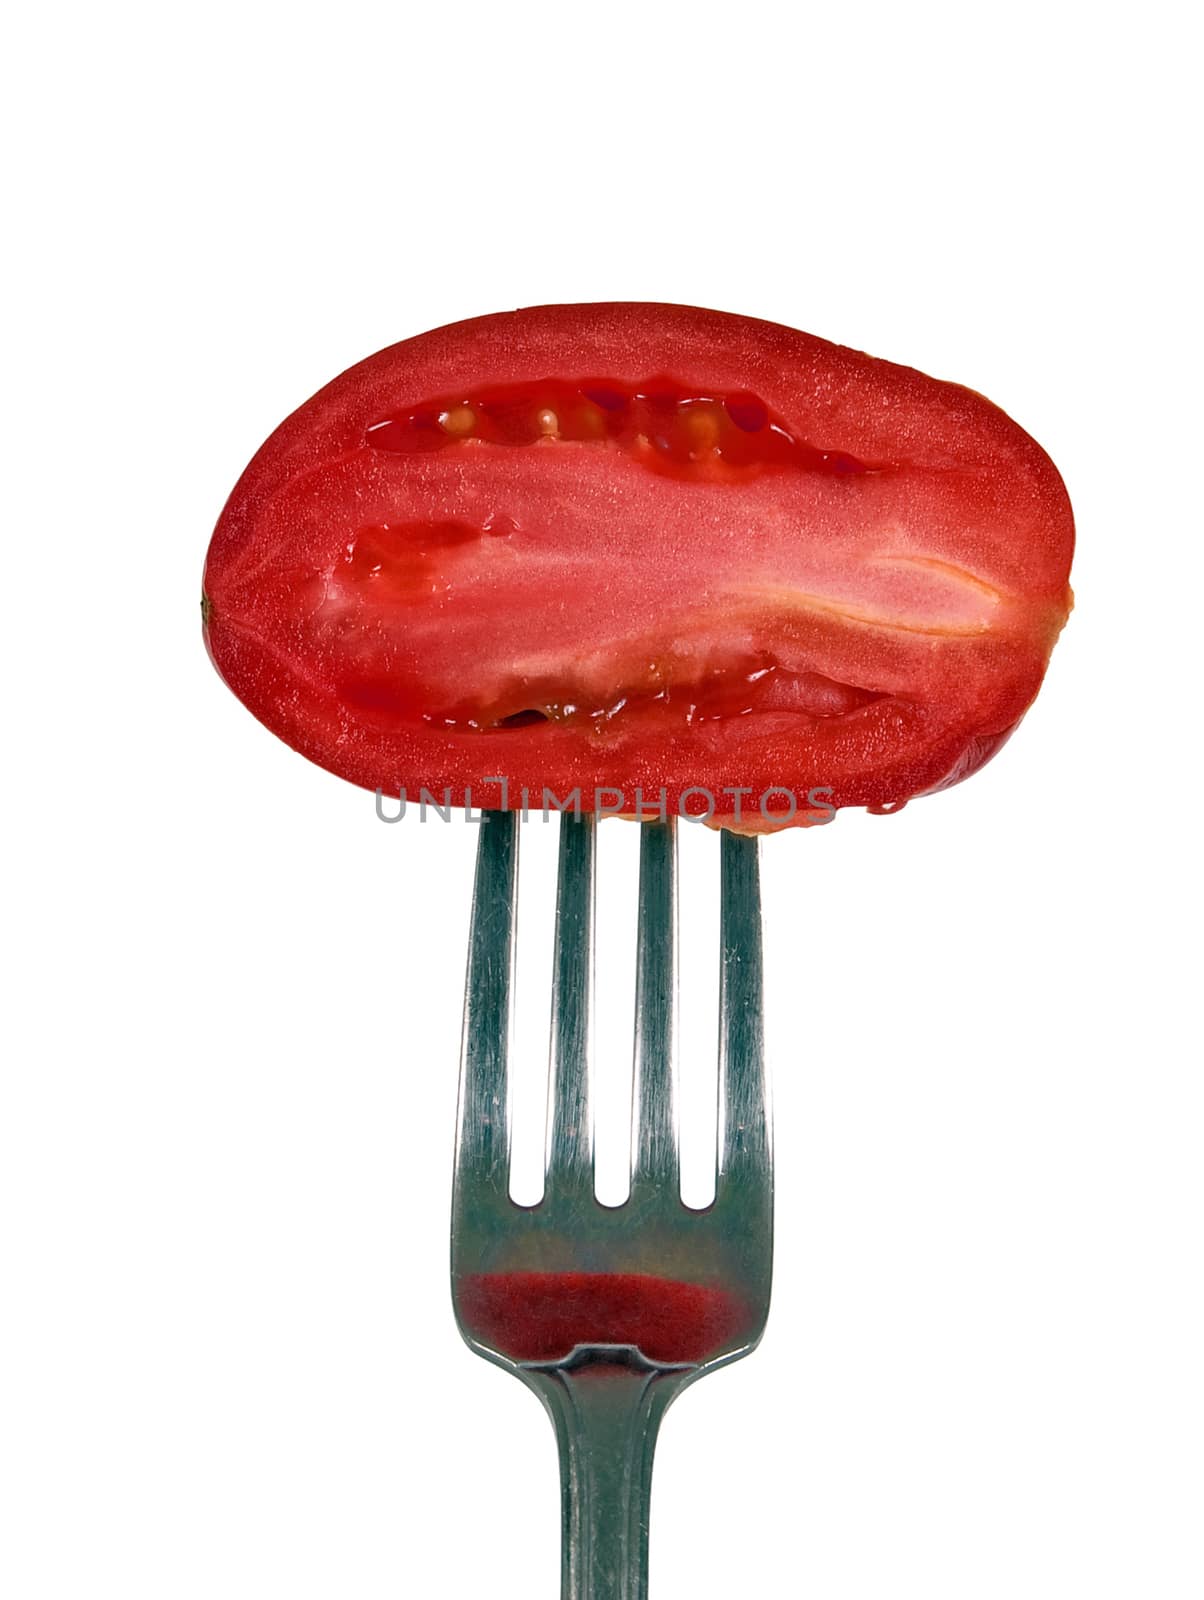 Vertical shot of a little tomato on a fork sliced opened